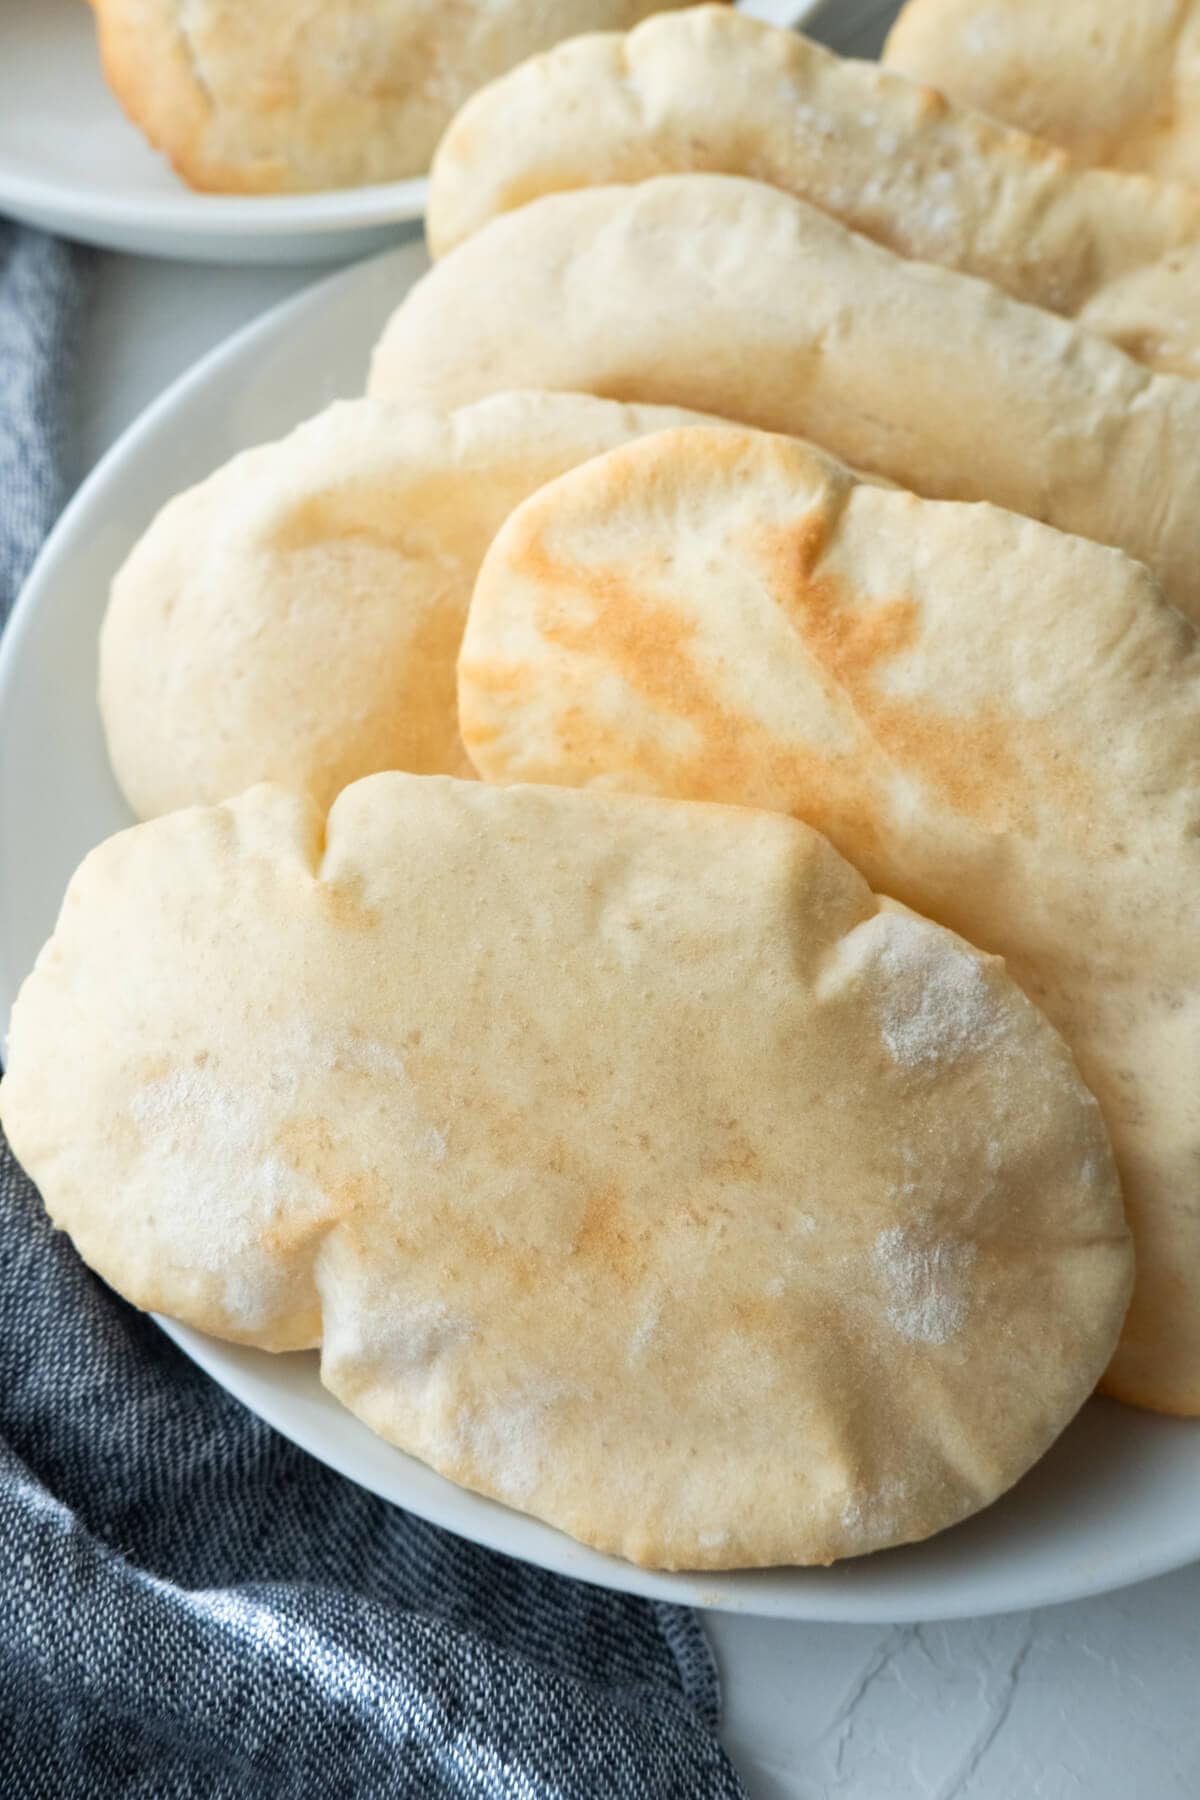 Puffy pita bread on a shallow plate.